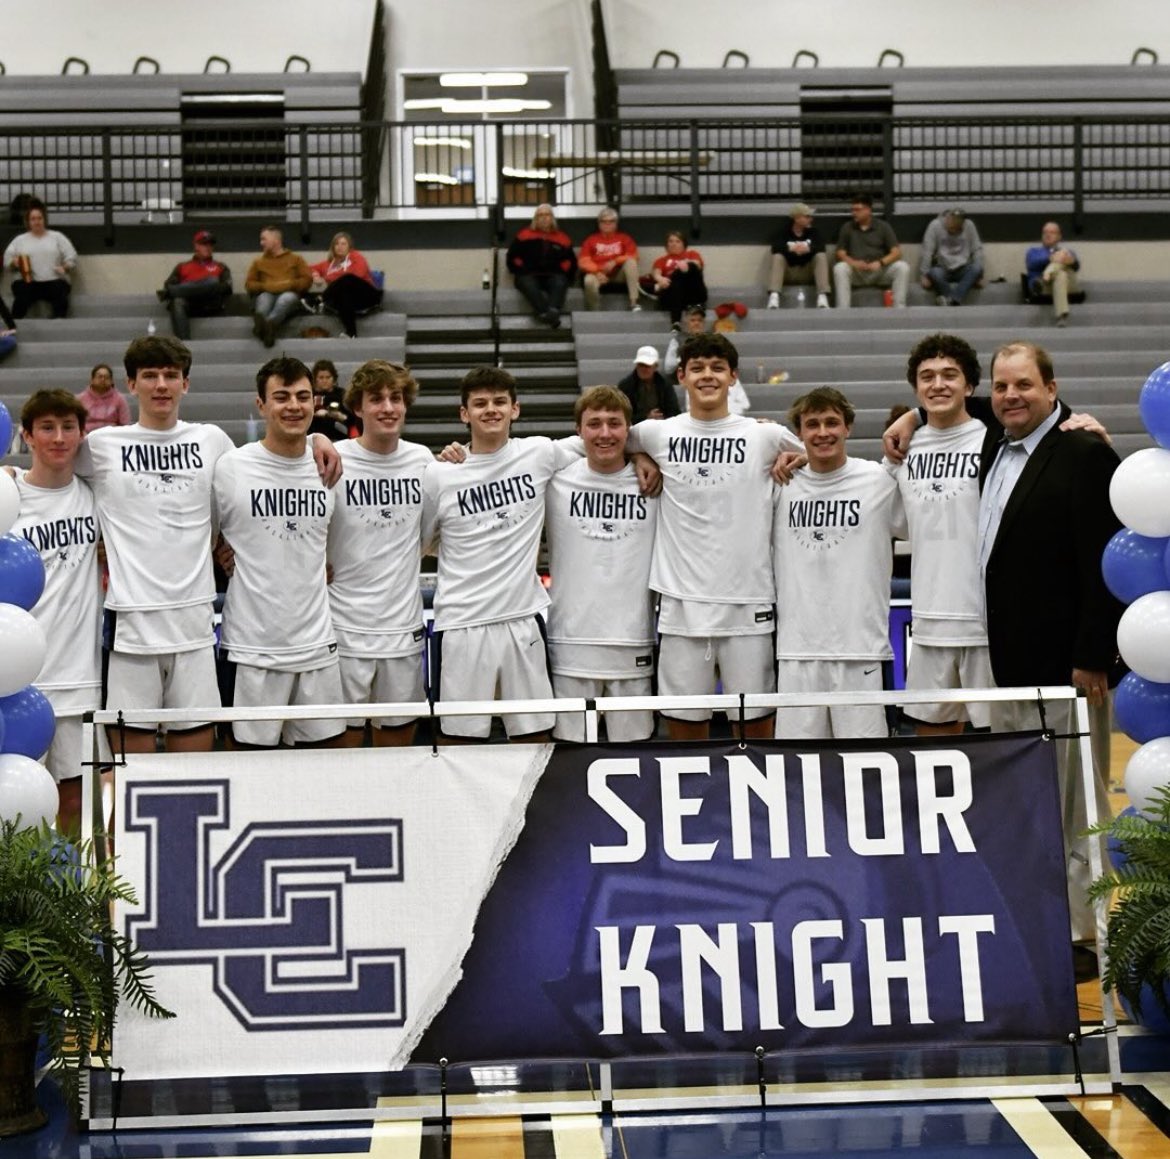 What can a knights say…tough loss last night… However, this was the greatest season as a knight I have ever been a part of. We exceeded all expectations, just came up a little short… Thank you seniors, hail catholic forever baby🇺🇸 #salssoldiers4life #hailcatholic